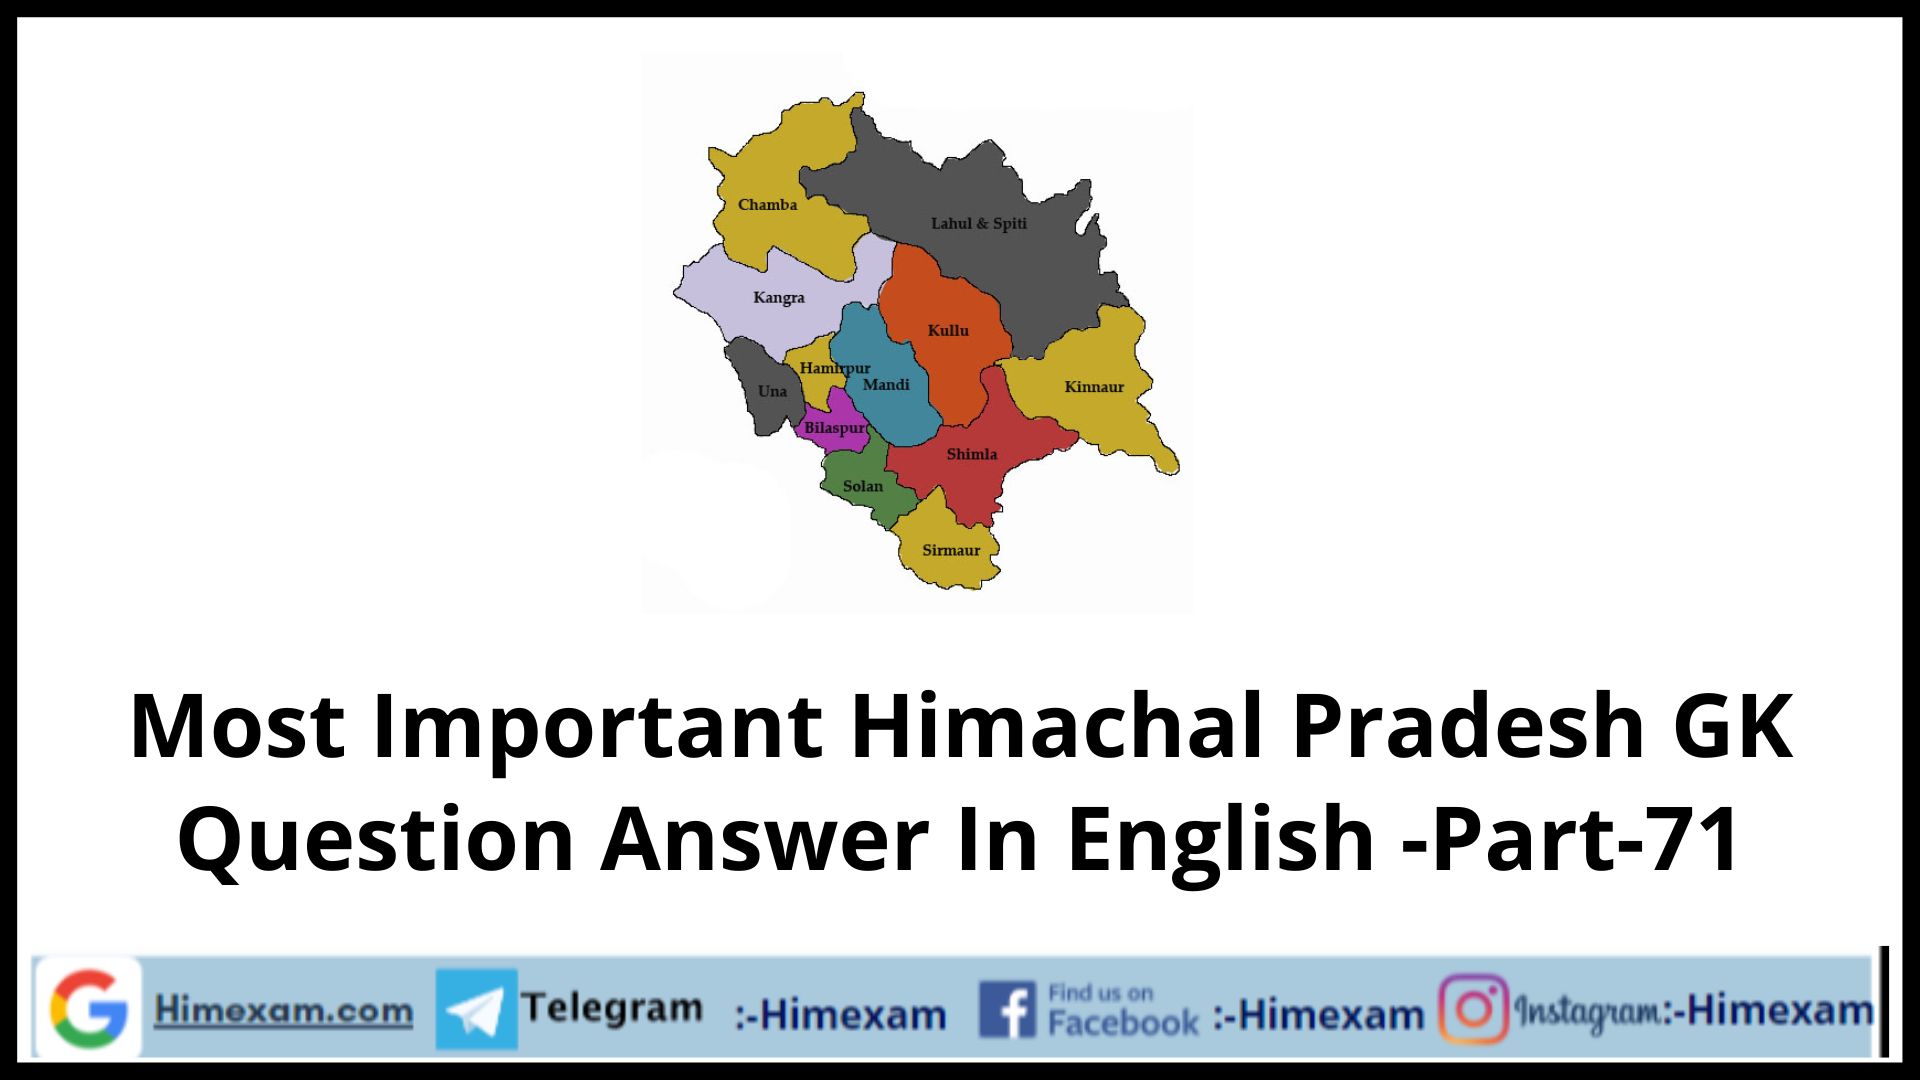 Most Important Himachal Pradesh GK Question Answer In English -Part-71